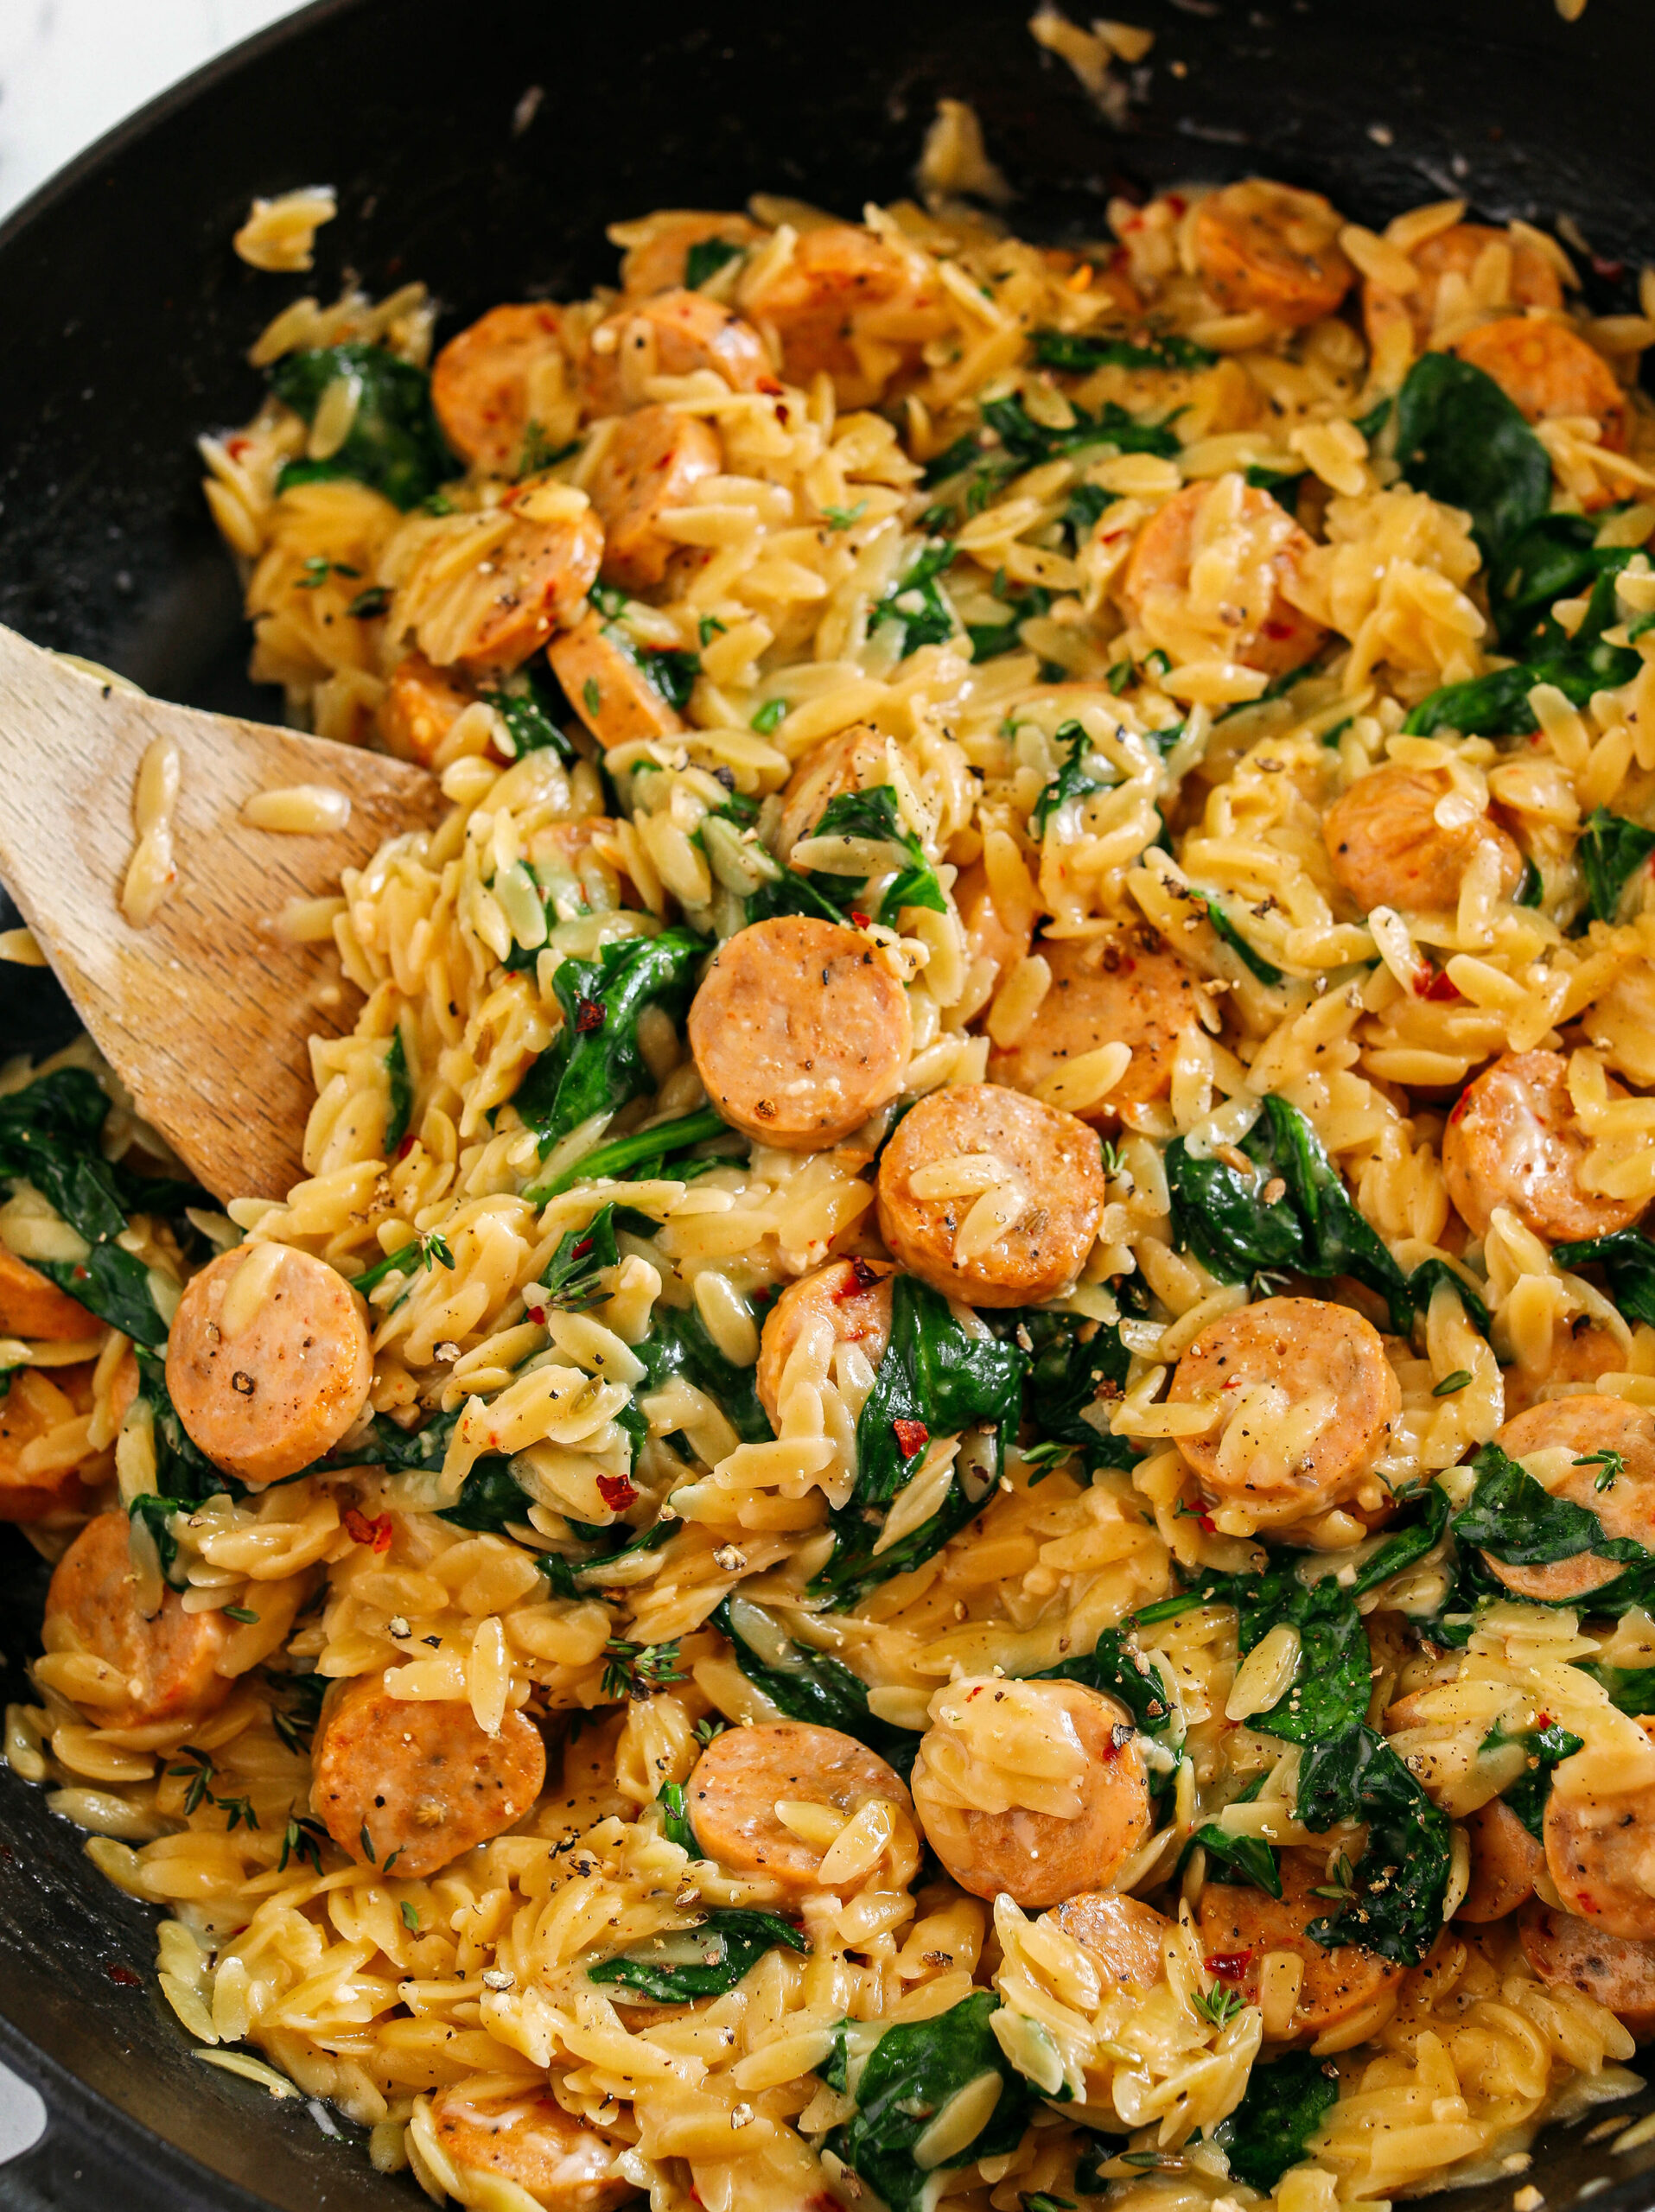 This Creamy Chicken Sausage Orzo Skillet is the perfect weeknight meal loaded with flavorful chicken sausage, tender orzo, tons of garlic and leafy spinach easily made in just 20 minutes all in one pan!  